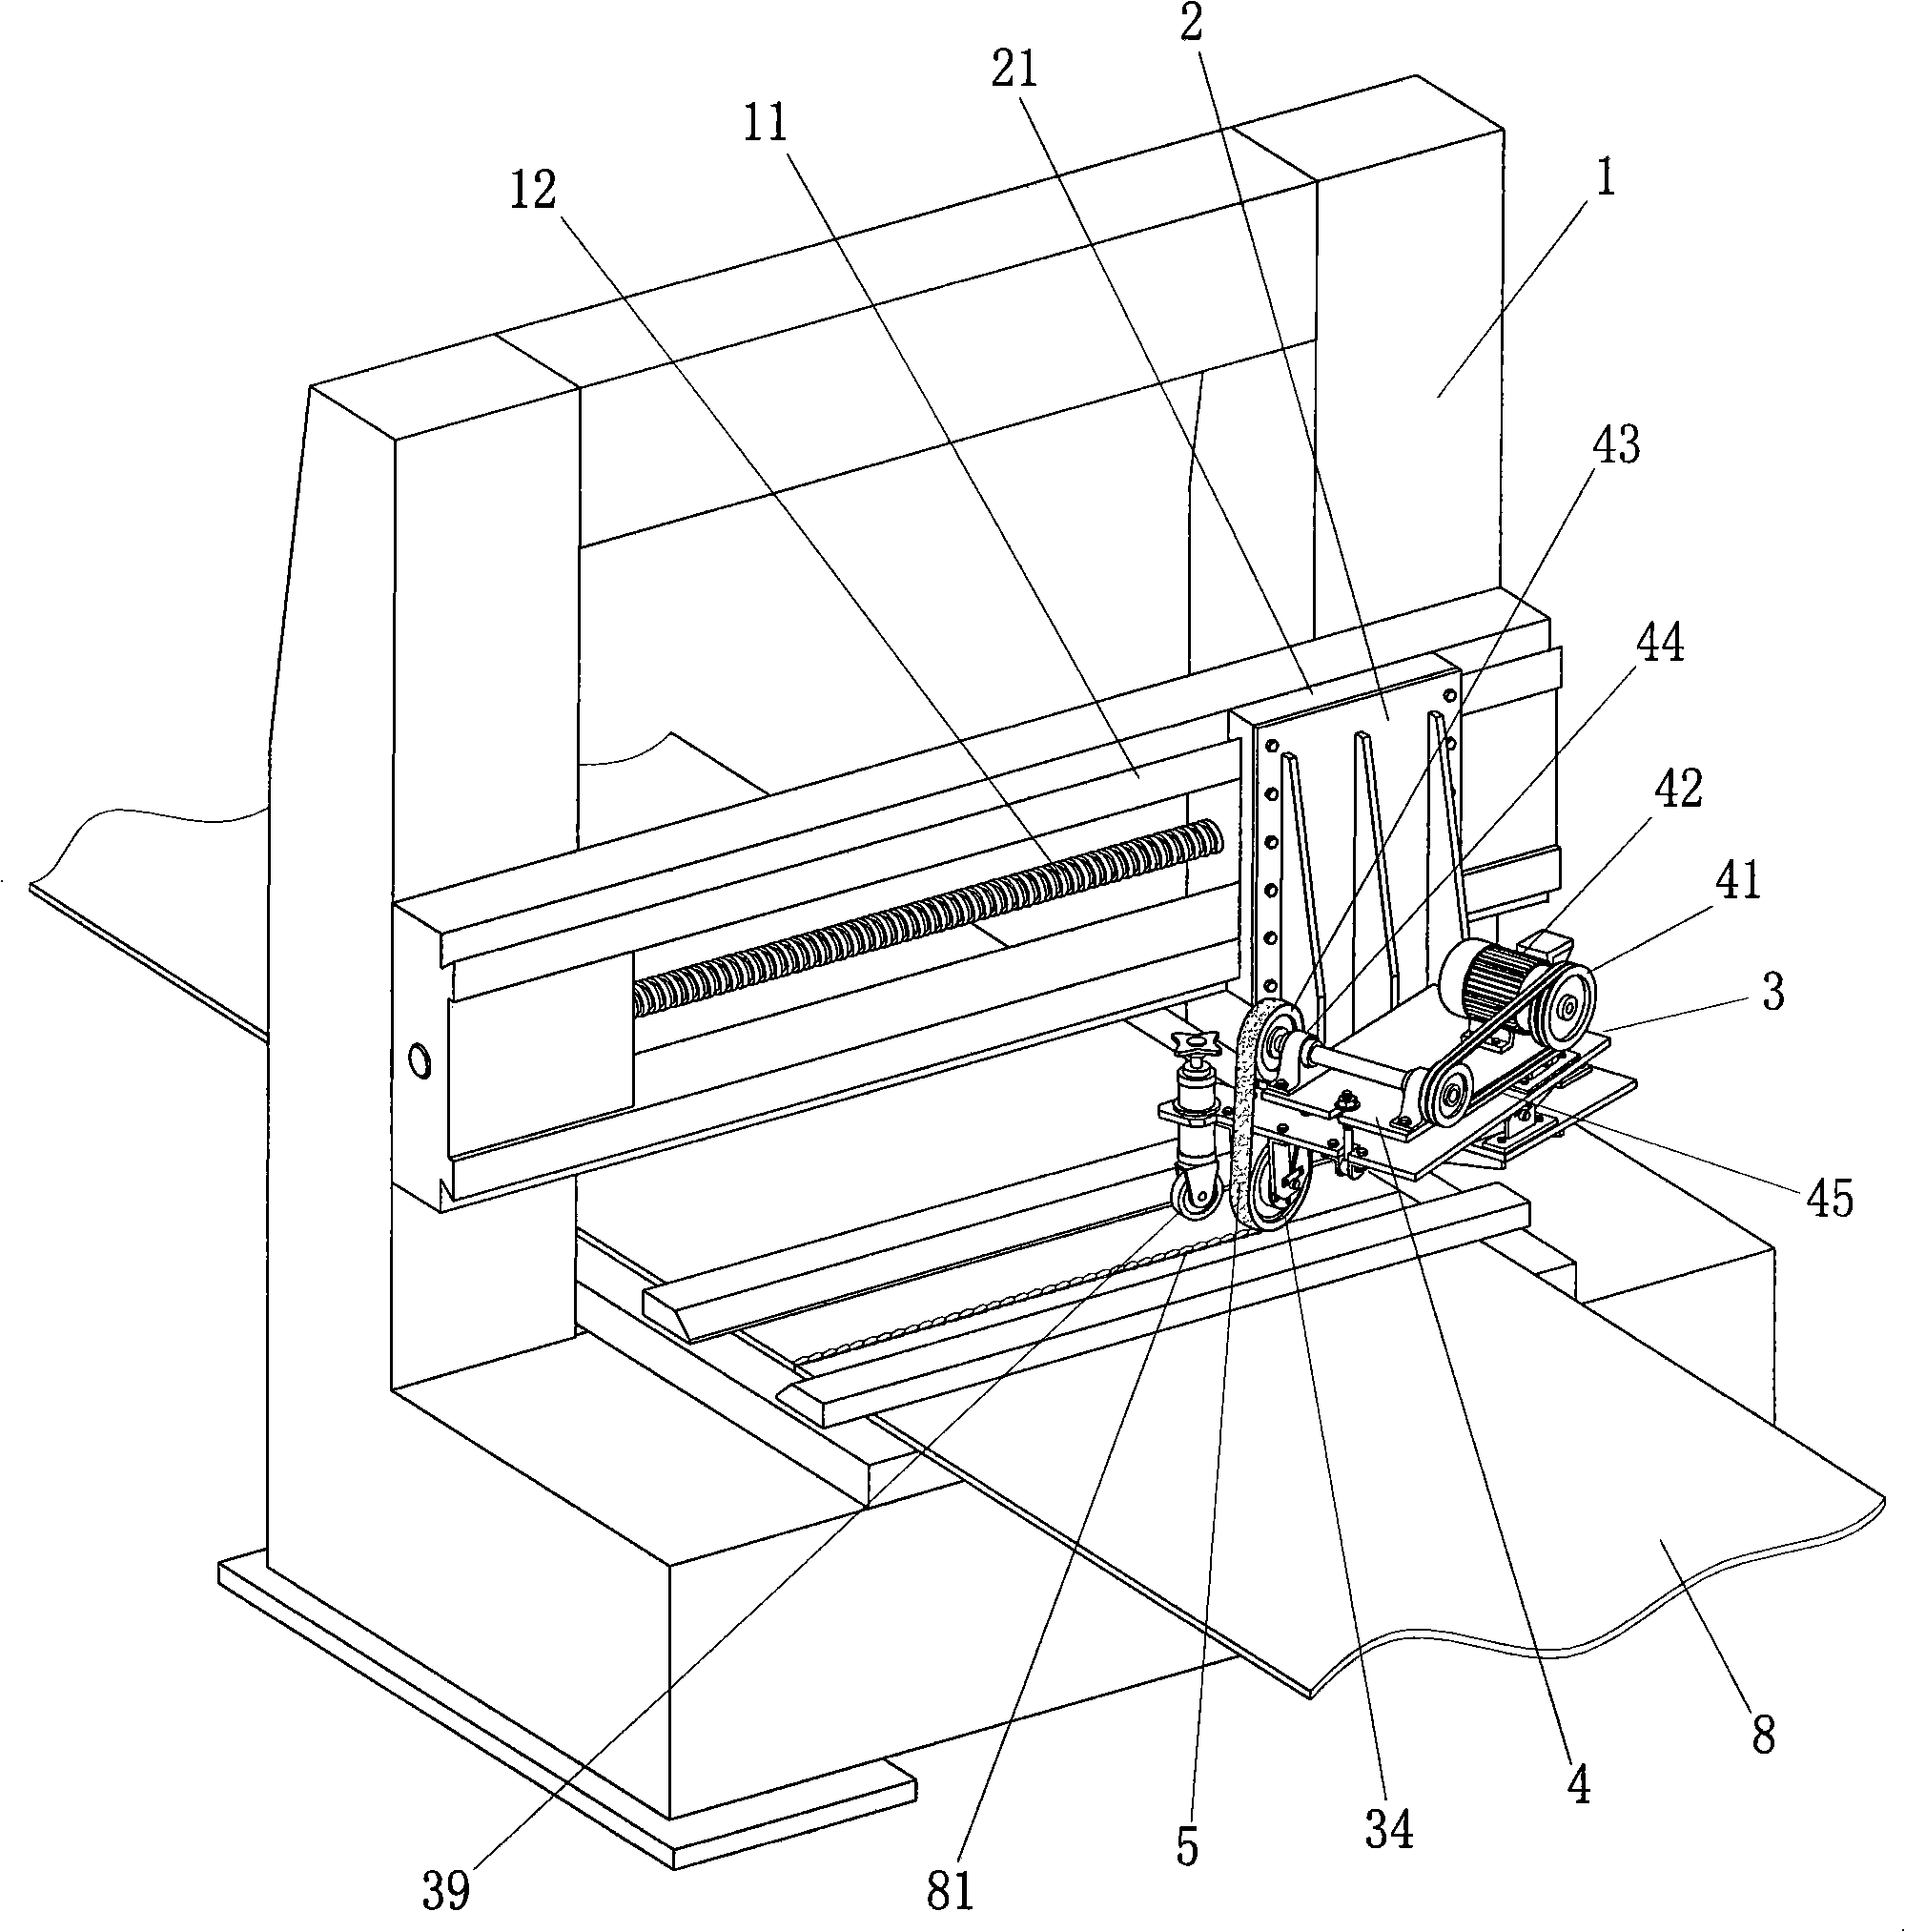 Butt-welding weld joint automatic coping device